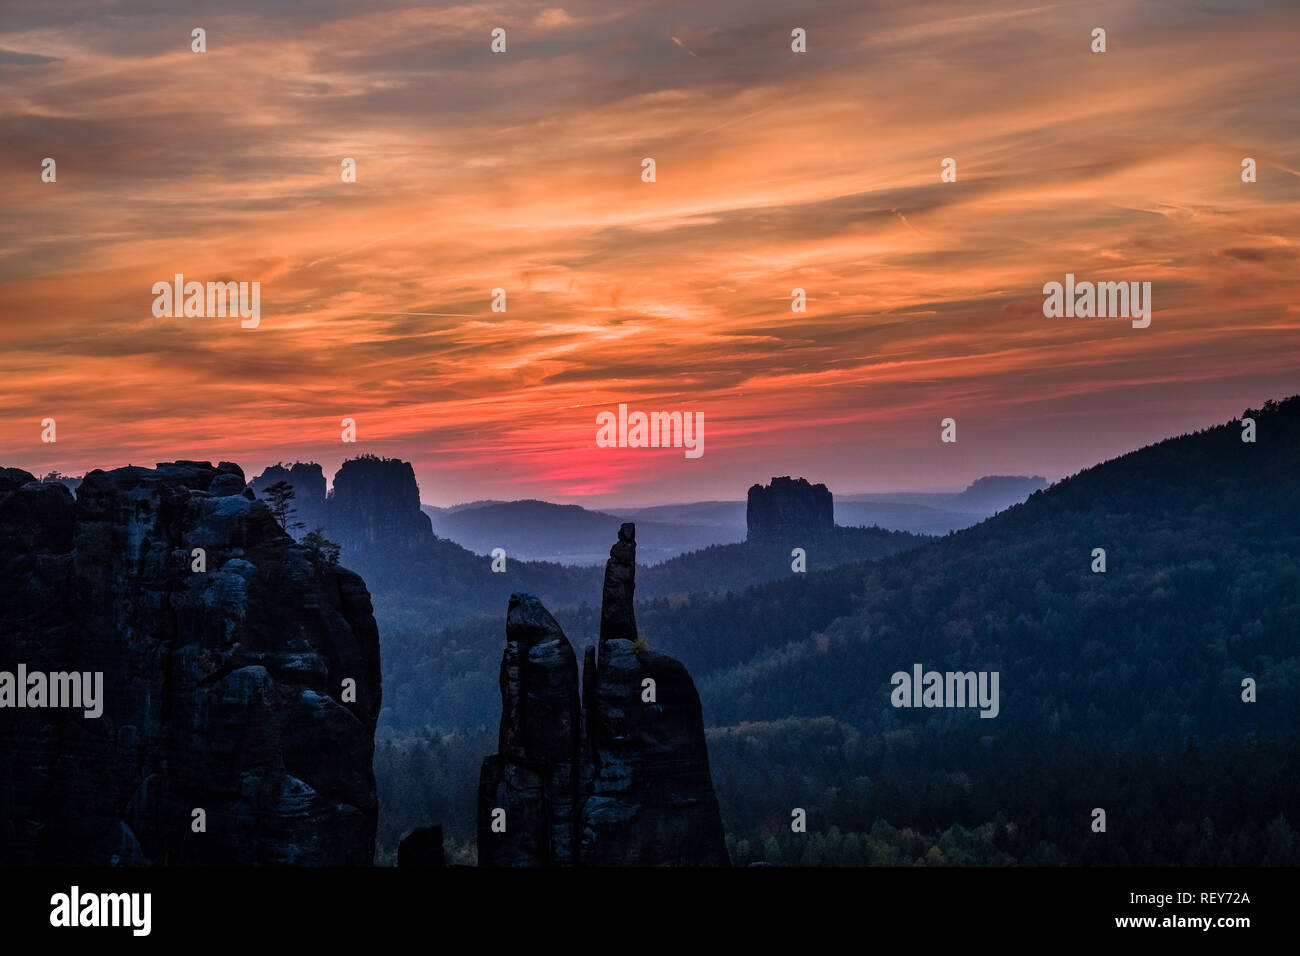 Landscape in the National Park Sächsische Schweiz with rock formations at sunset Stock Photo